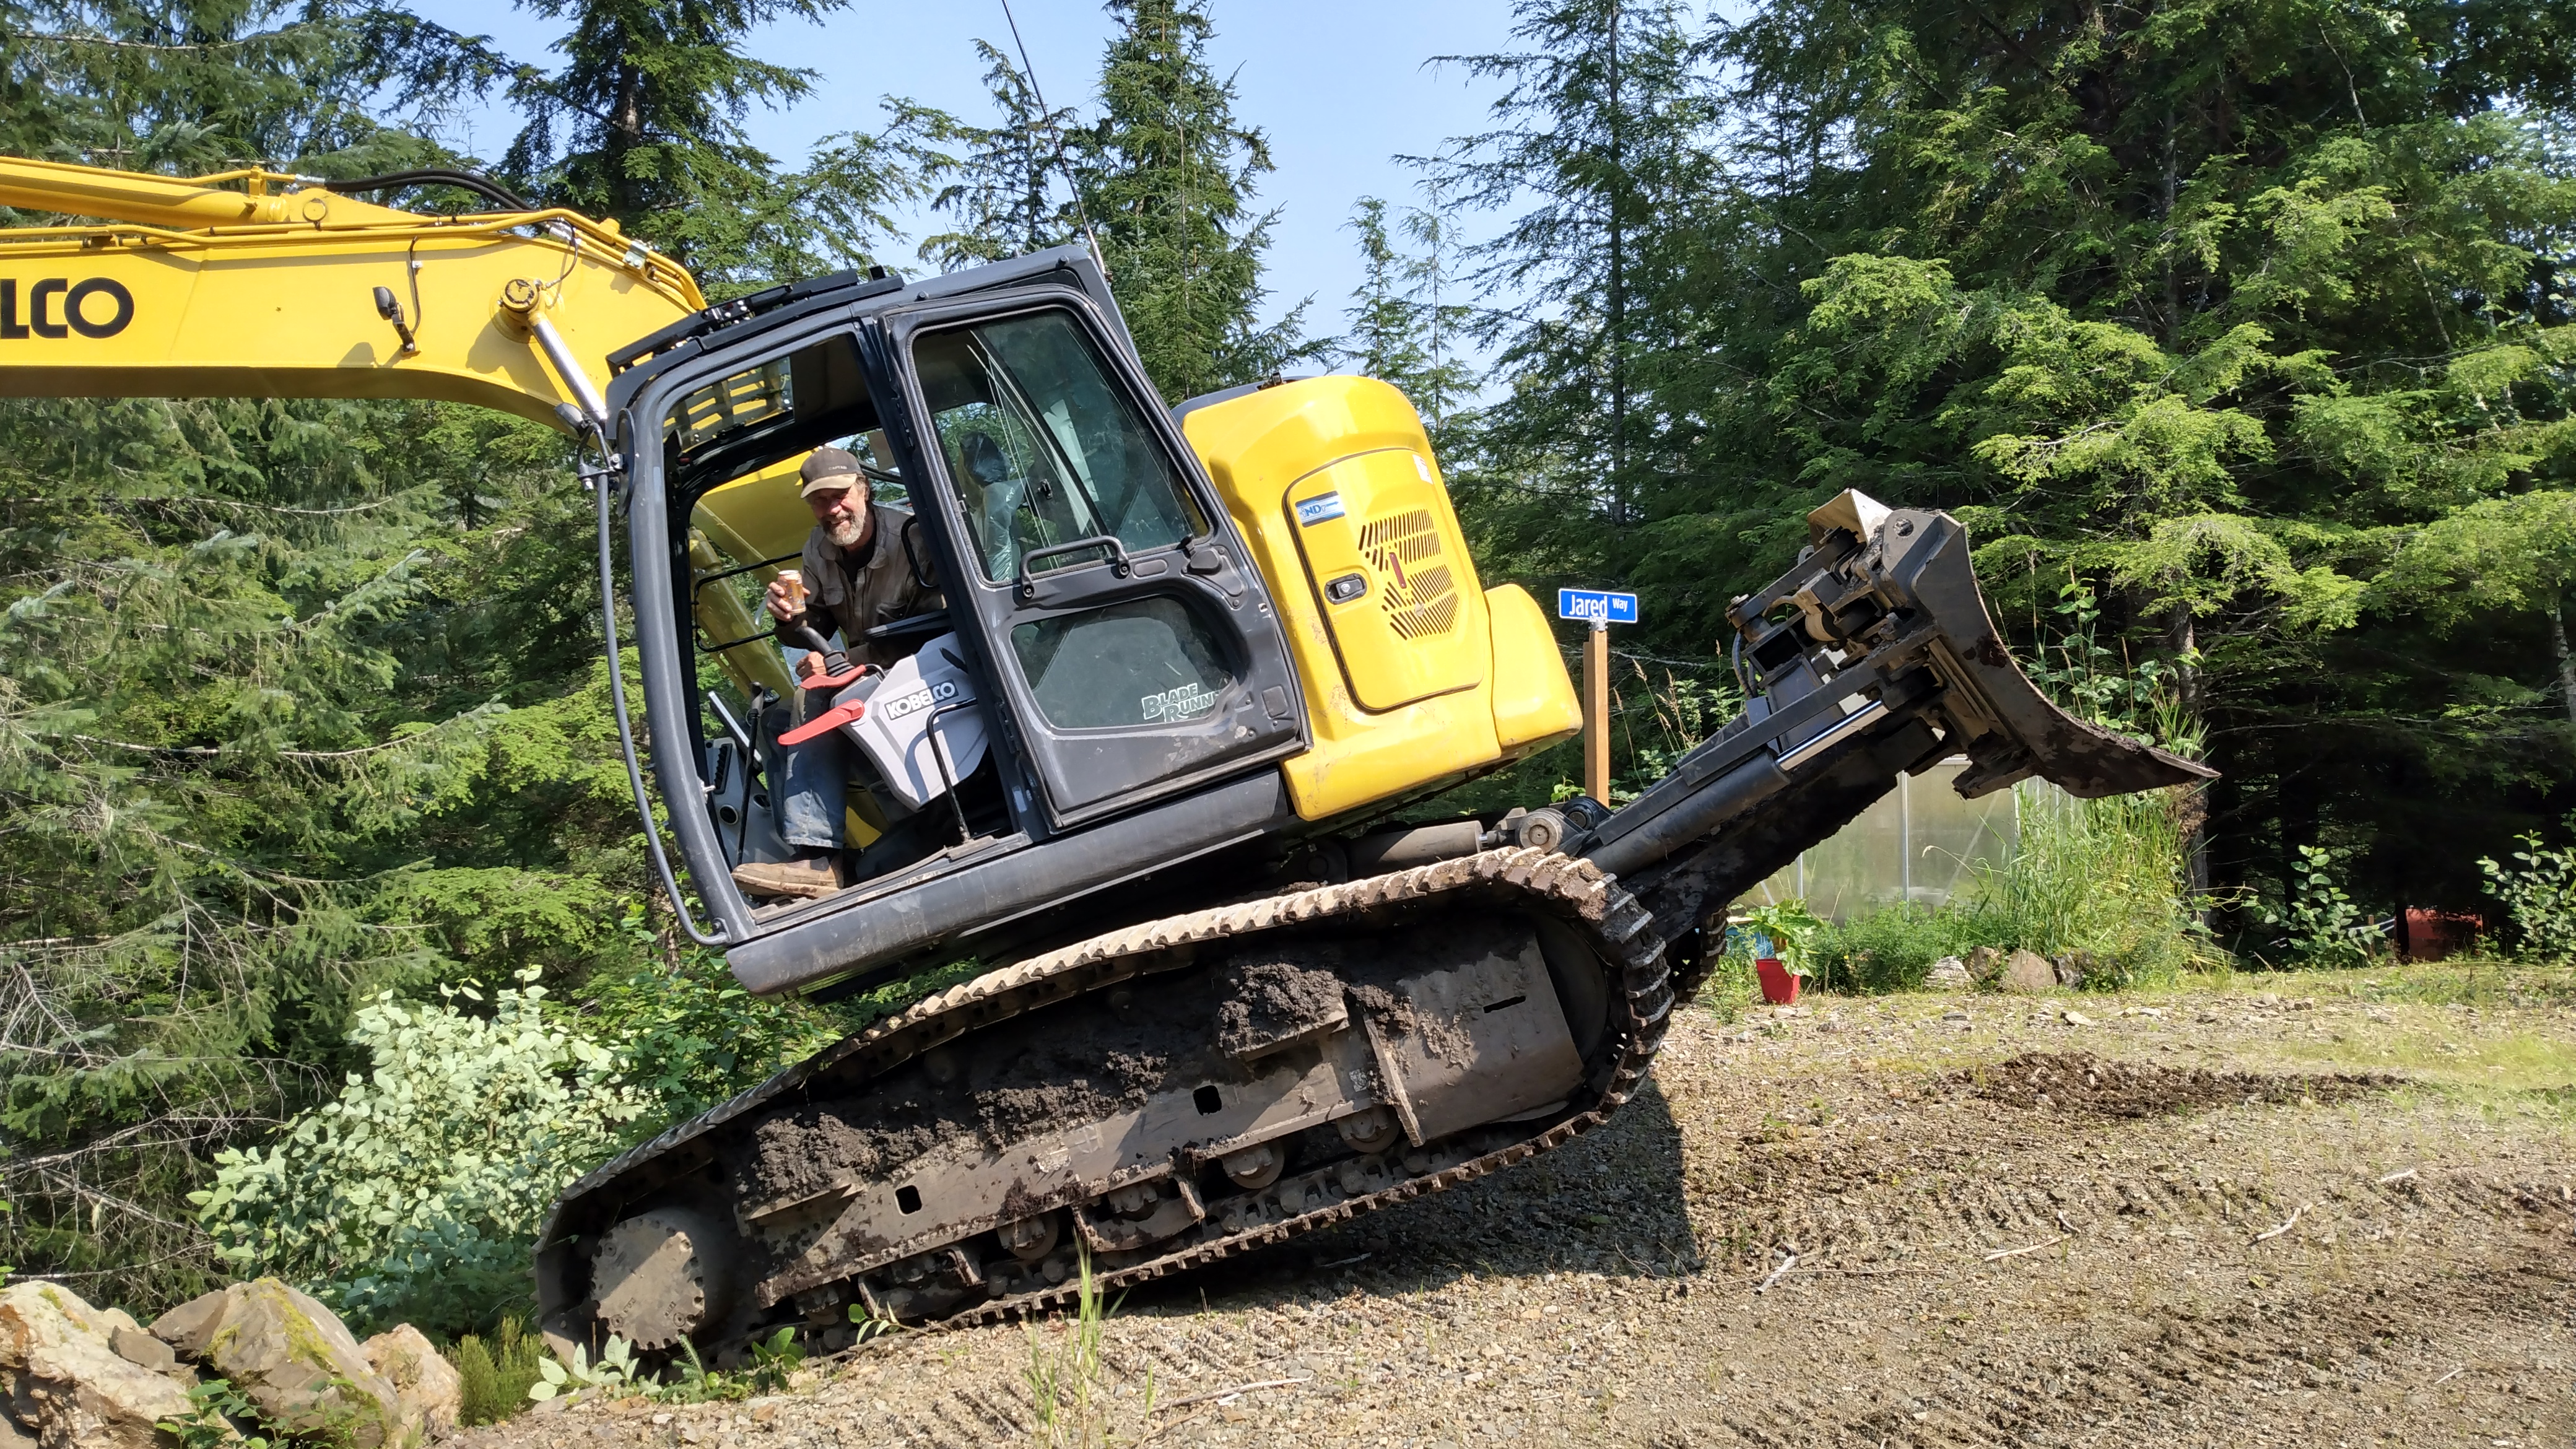 A closer view of the excavator with a grinning operator inside, holding a can of soda, and the excavator is balanced on the front of its tracks as it appears about to descend a steep hillside